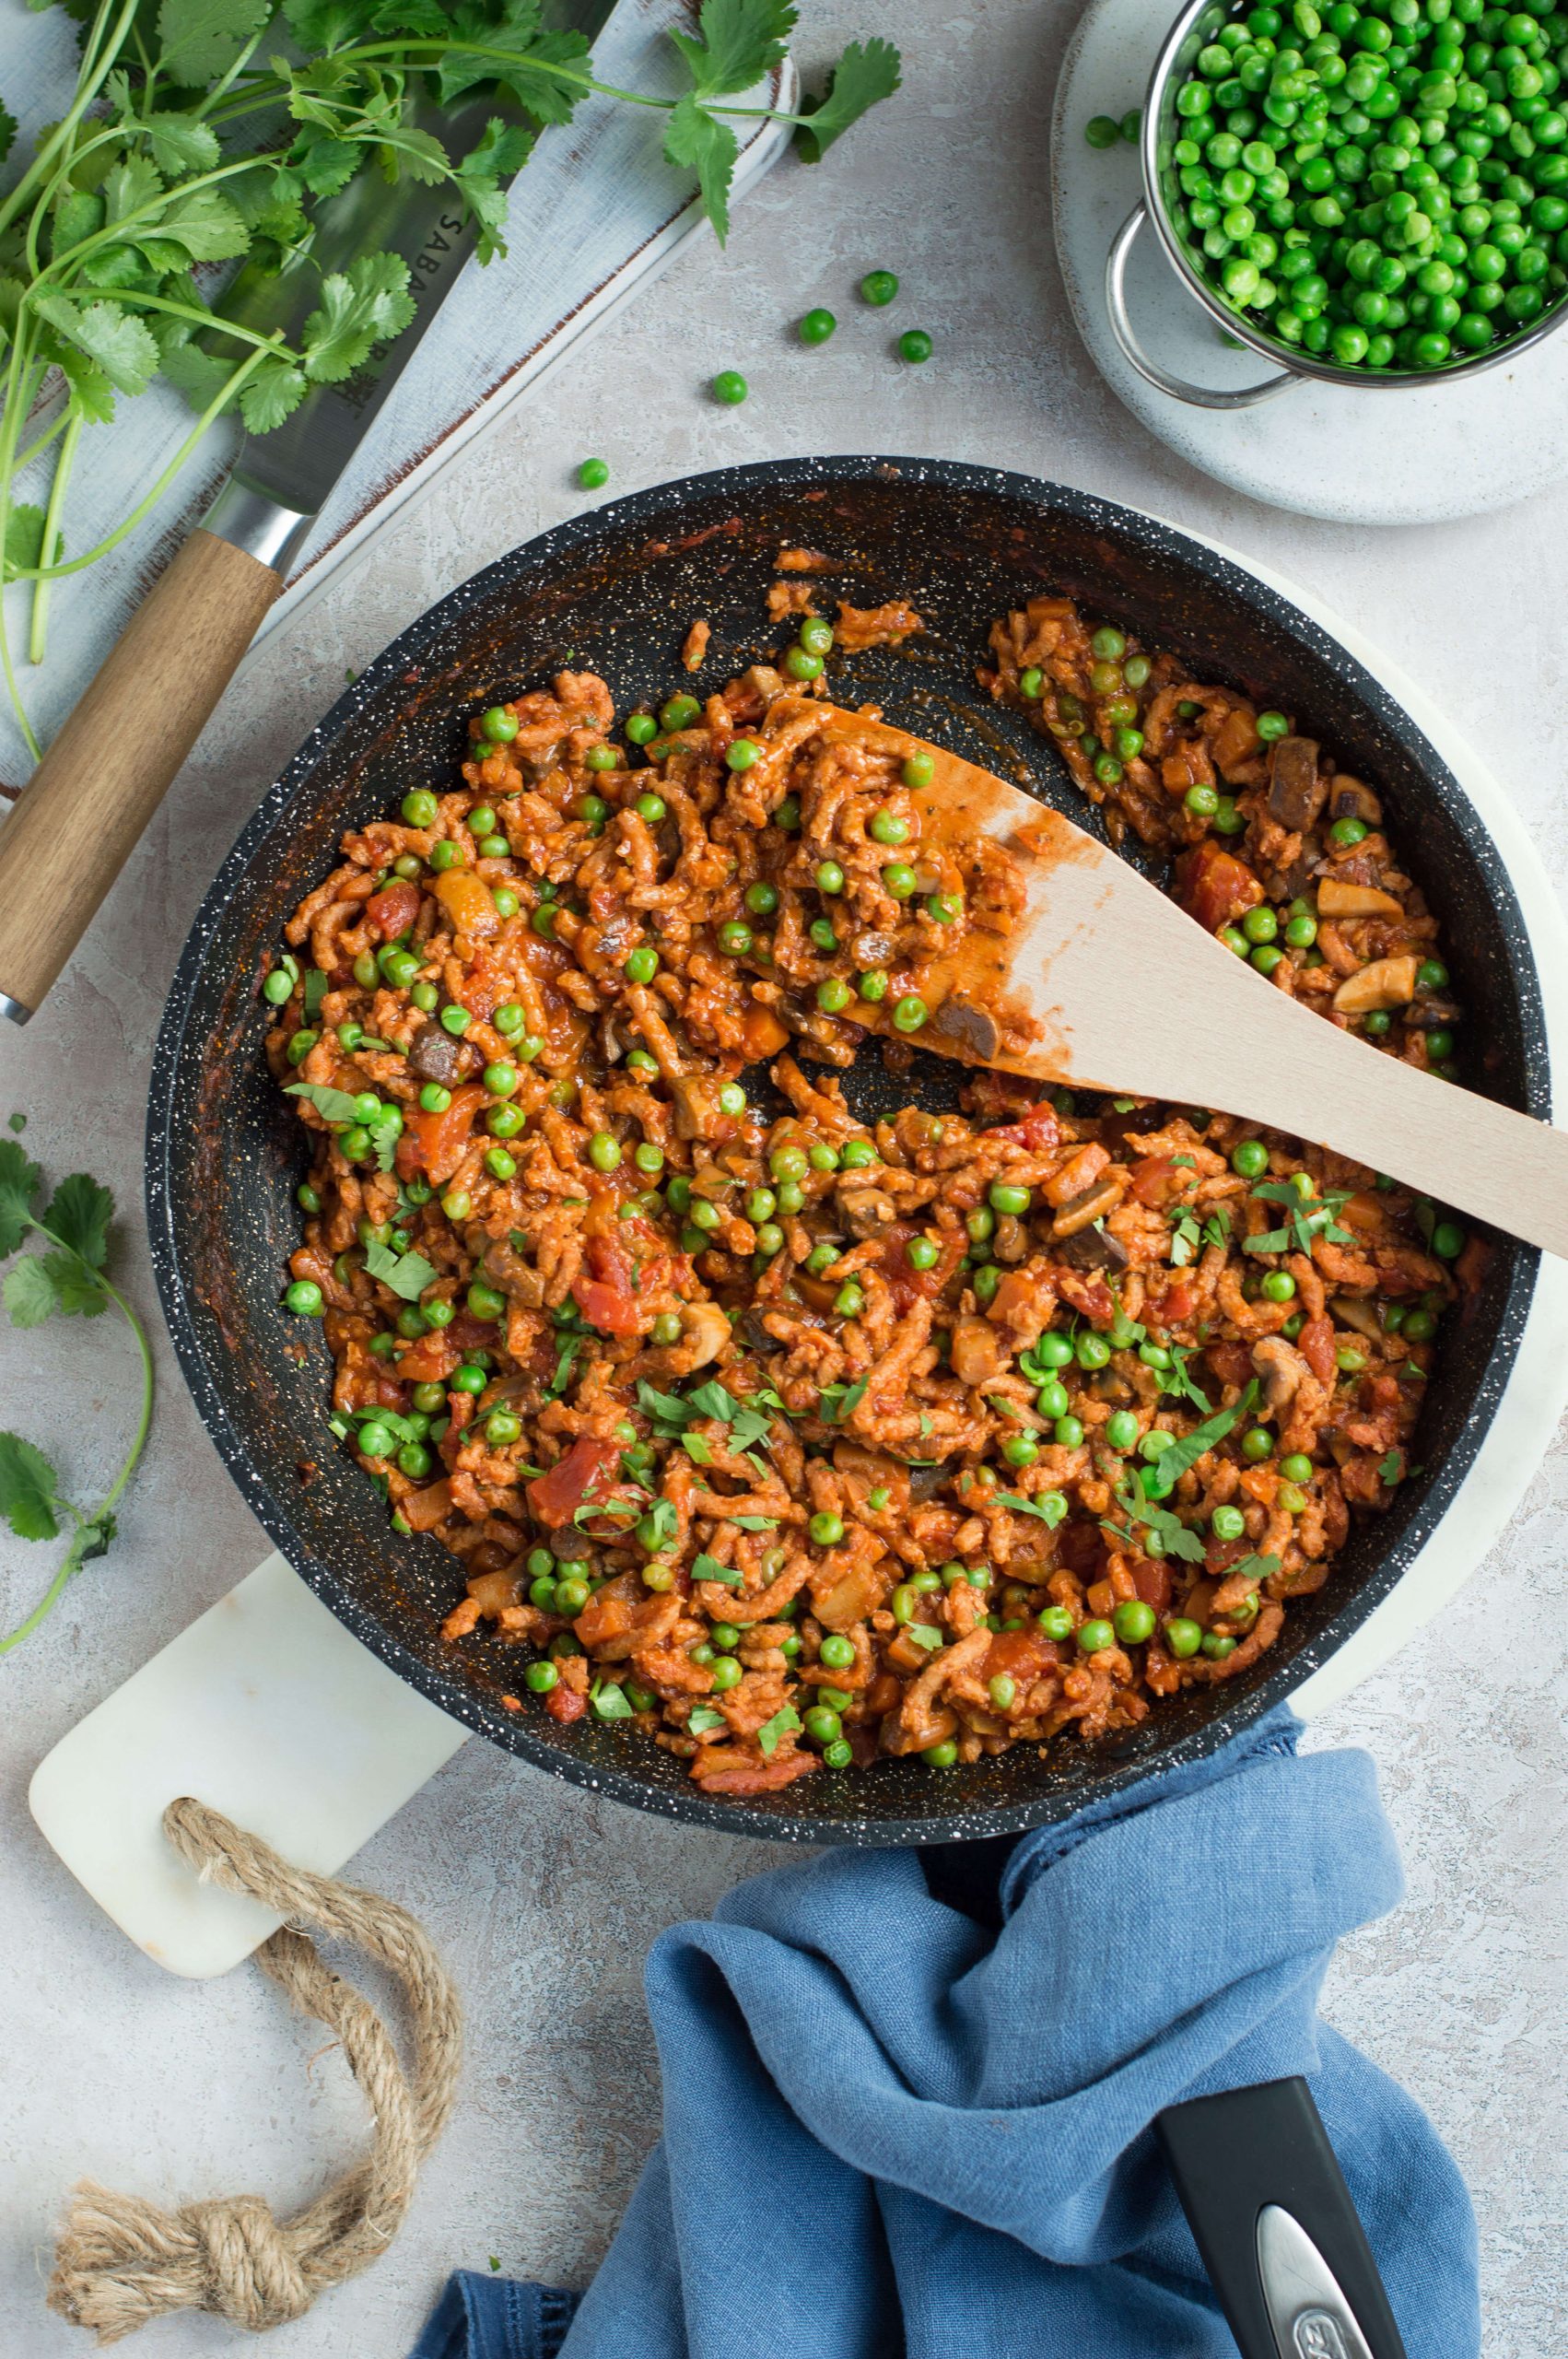 A frying pan with meat free mince meat & vegetables